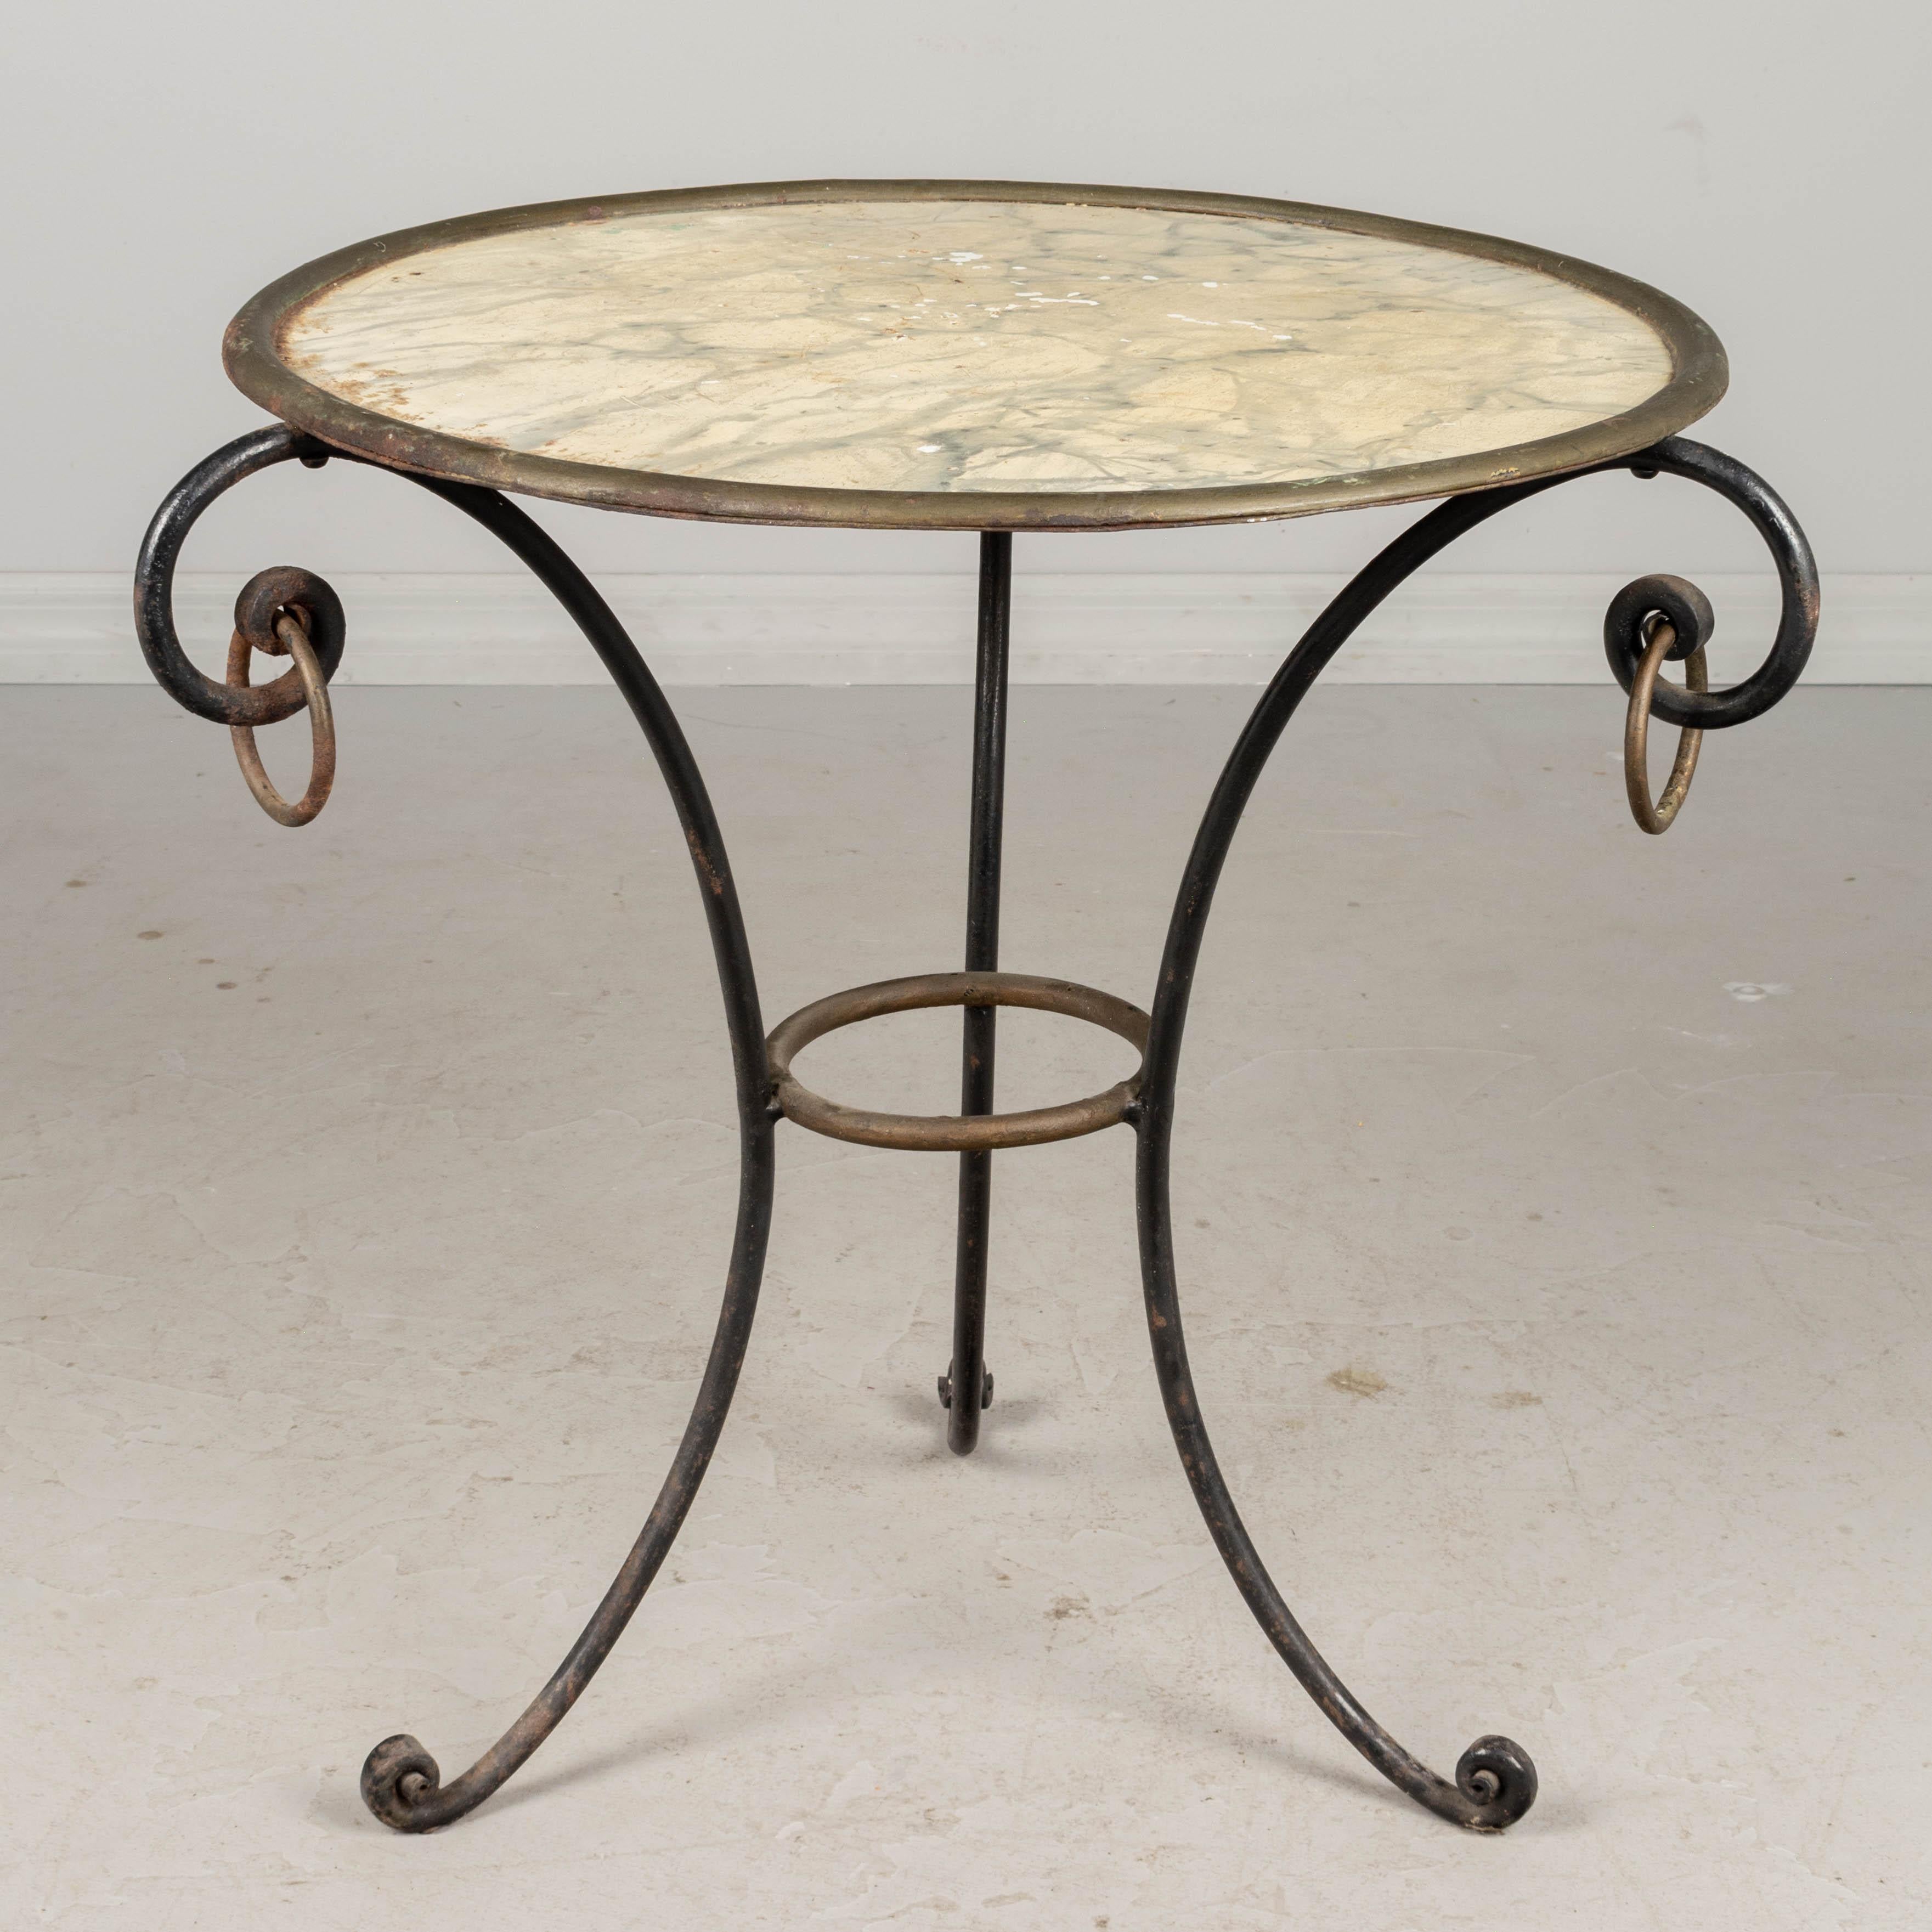 A French mid century wrought iron side table with faux marble painted tole top. Black tripod base with large decorative rings. Painted surface is slightly worn with some paint loss and rust spots. Please refer to photos for more details. Pictures